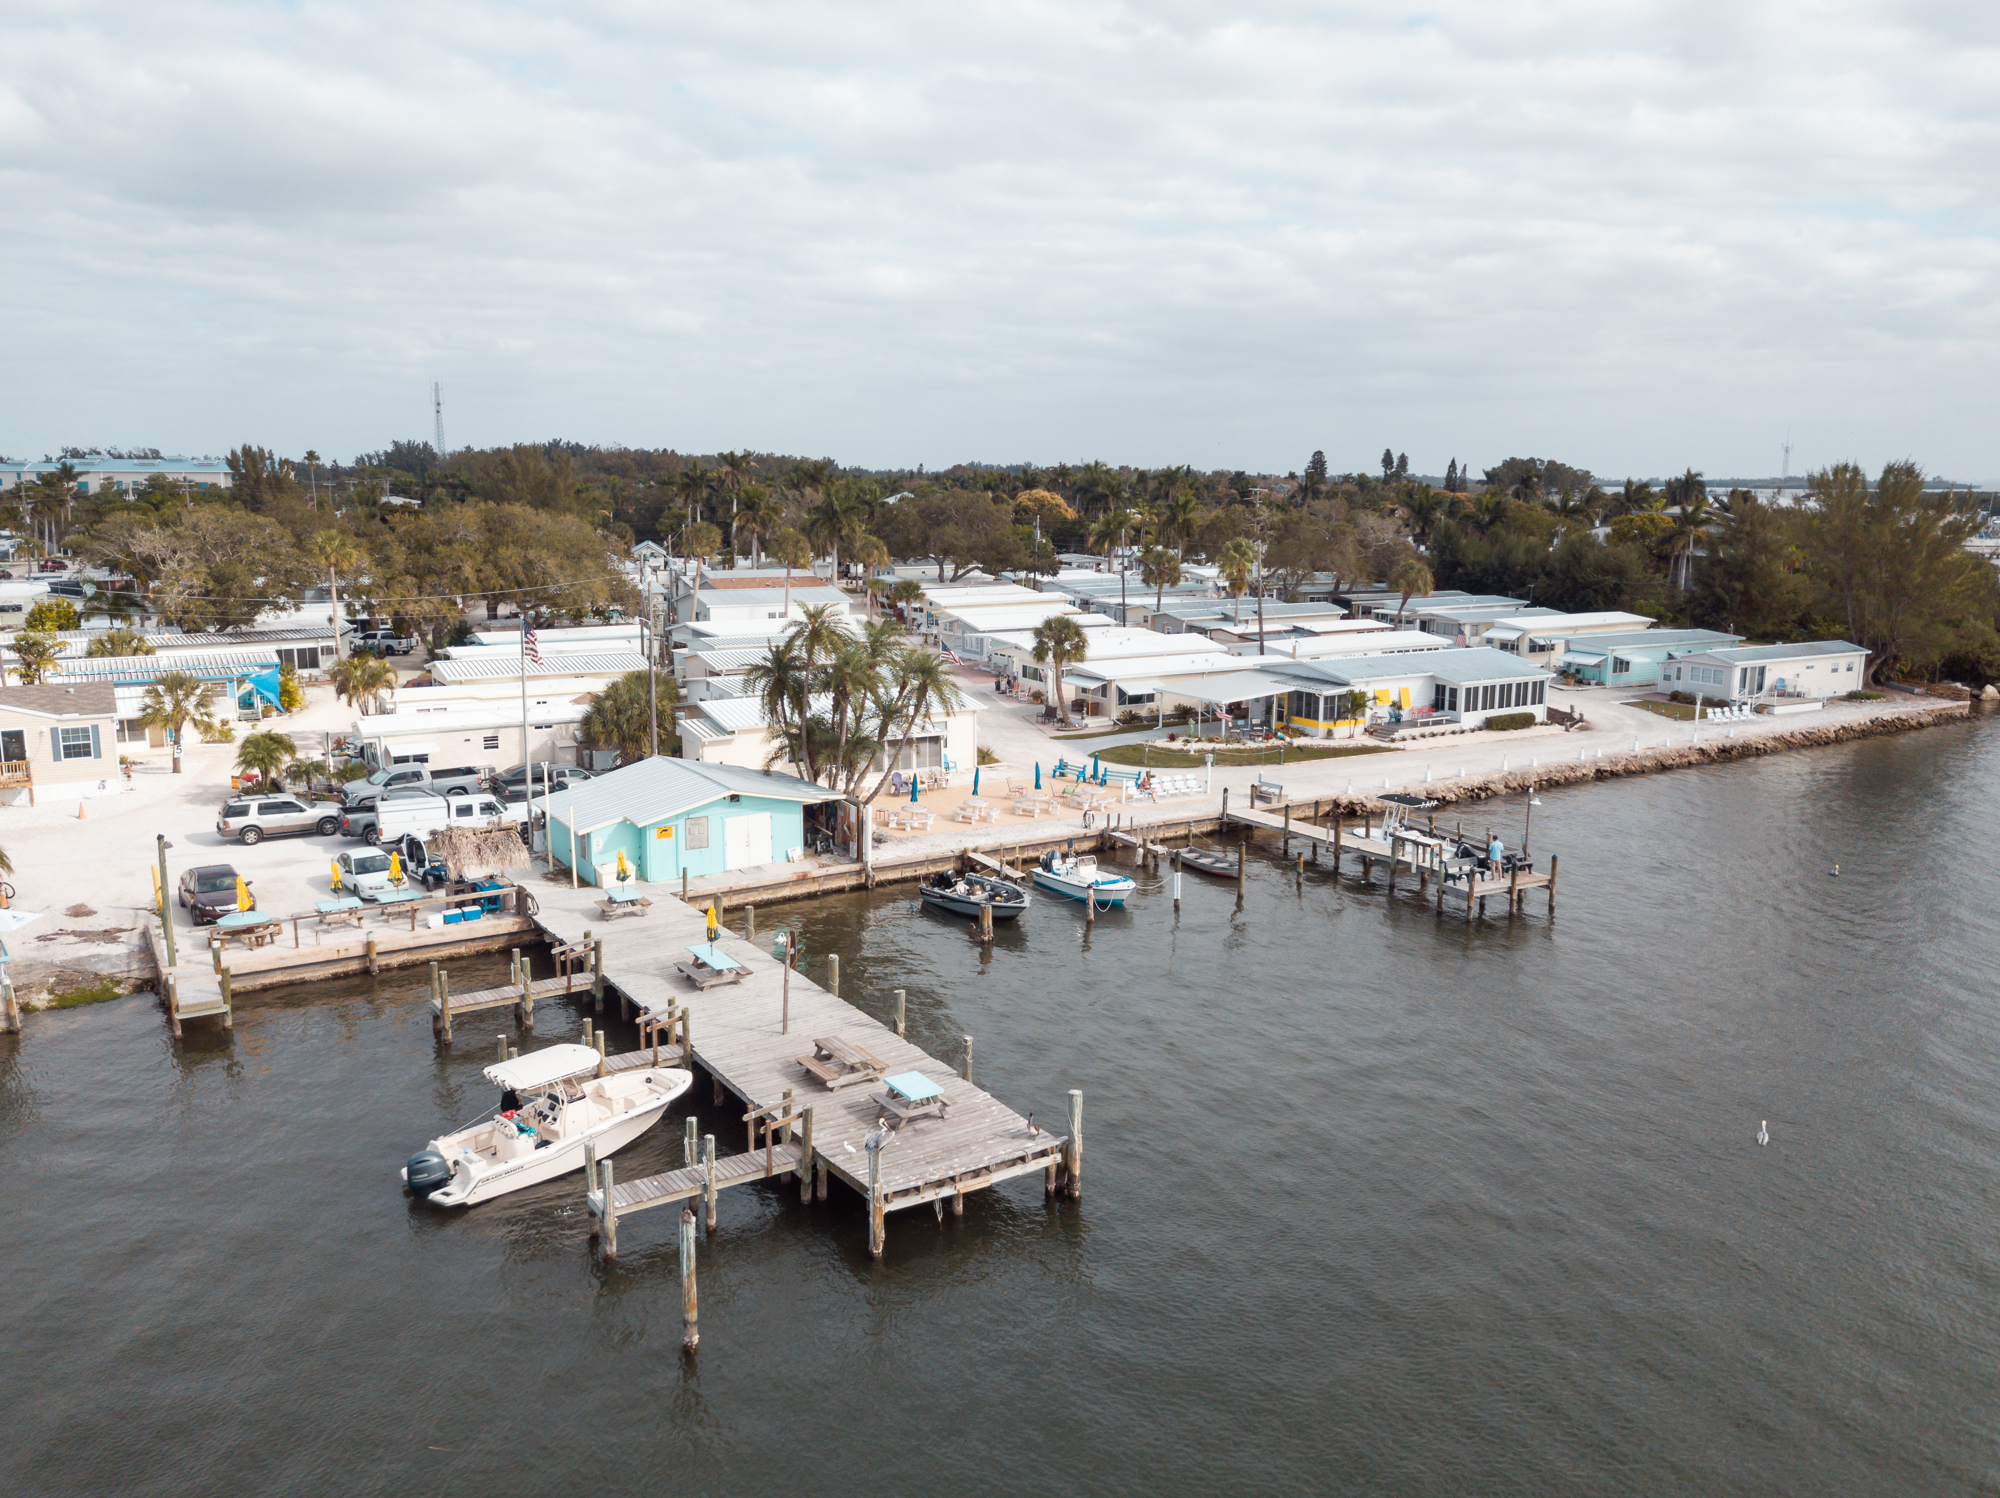 You won’t see high-rise buildings in Cortez Village. Instead, simple waterfront homes, cottages and vintage mobile home parks dot the shoreline.